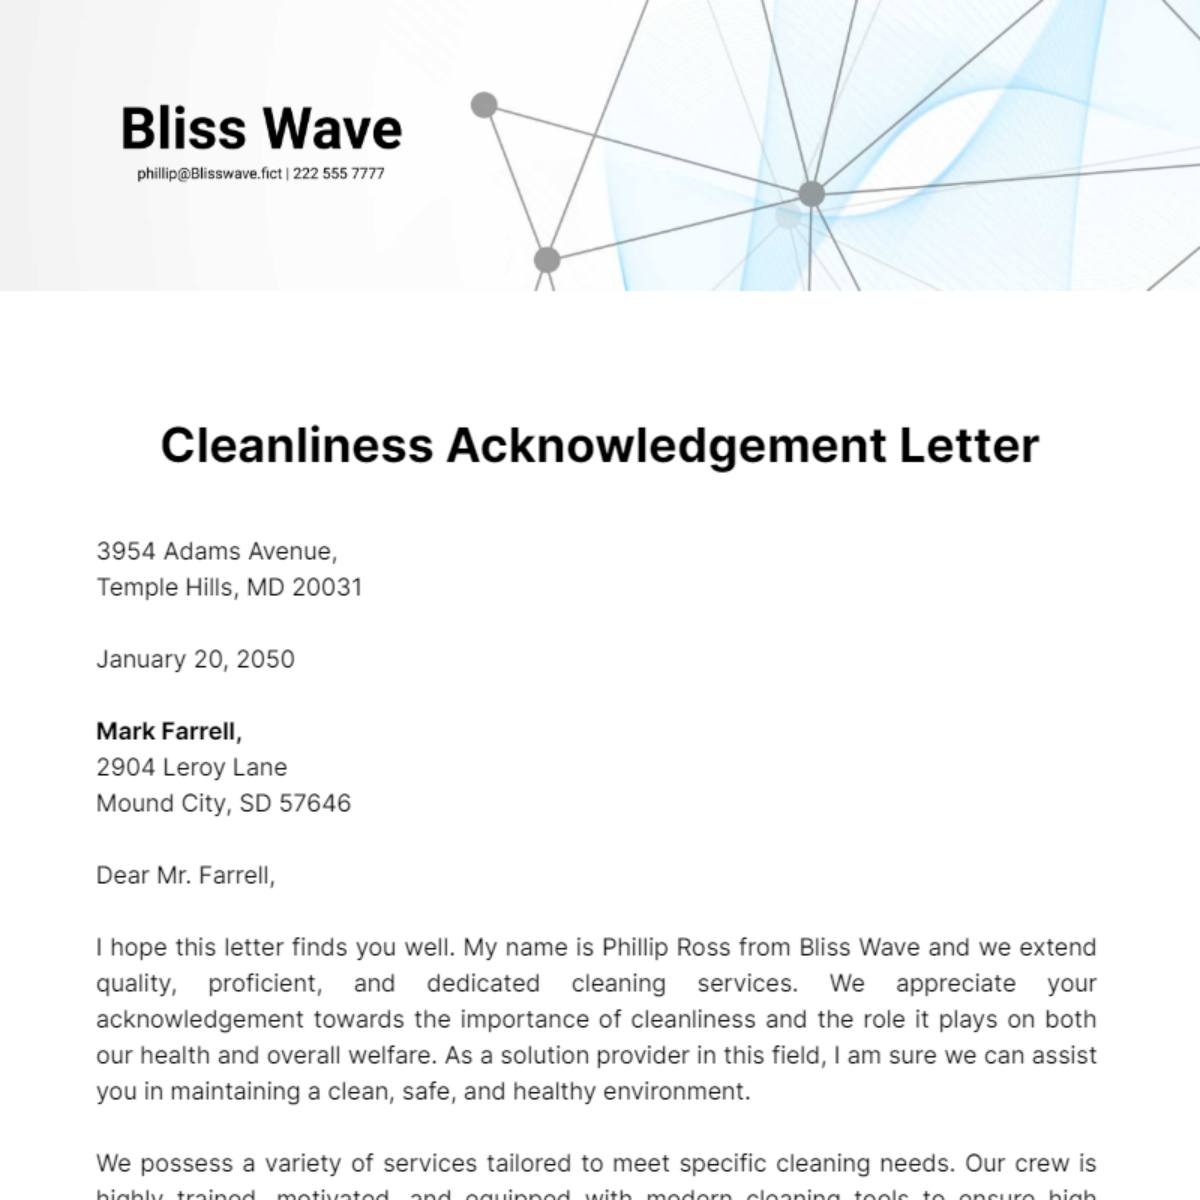 Cleanliness Acknowledgement Letter Template